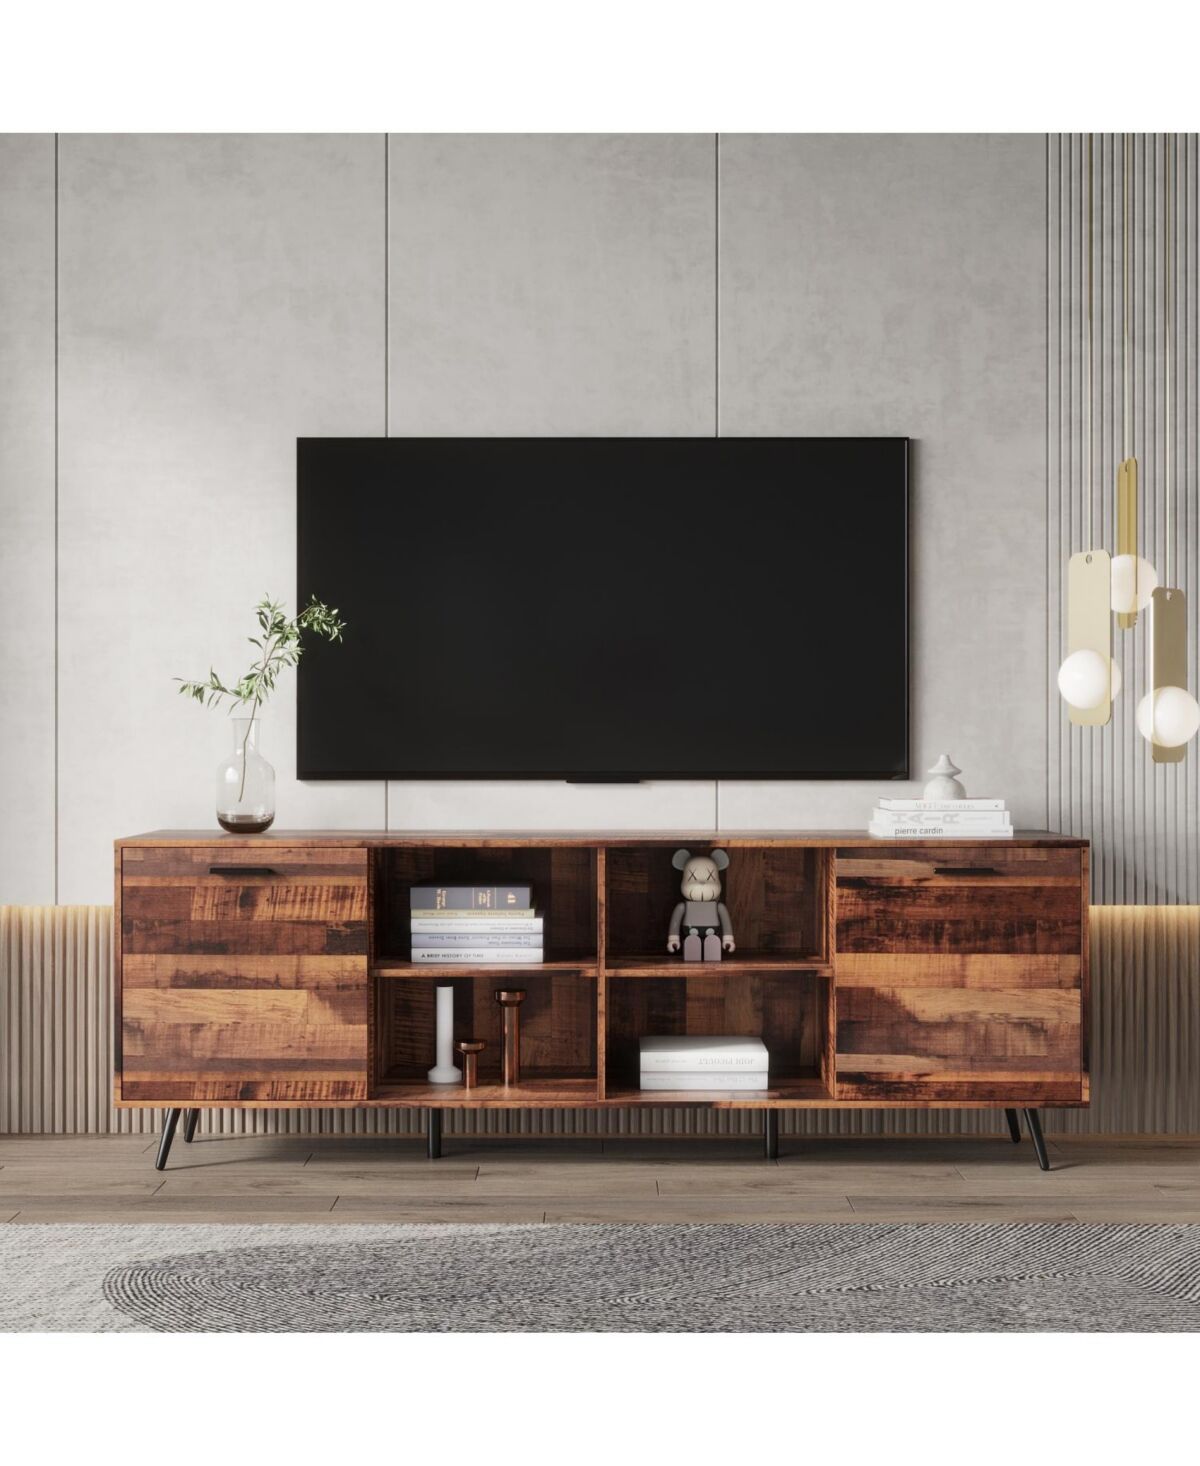 Simplie Fun Tv Stand Mid-Century Wood Modern Entertainment Center Adjustable Storage Cabinet Tv Console for Living Room - Brown